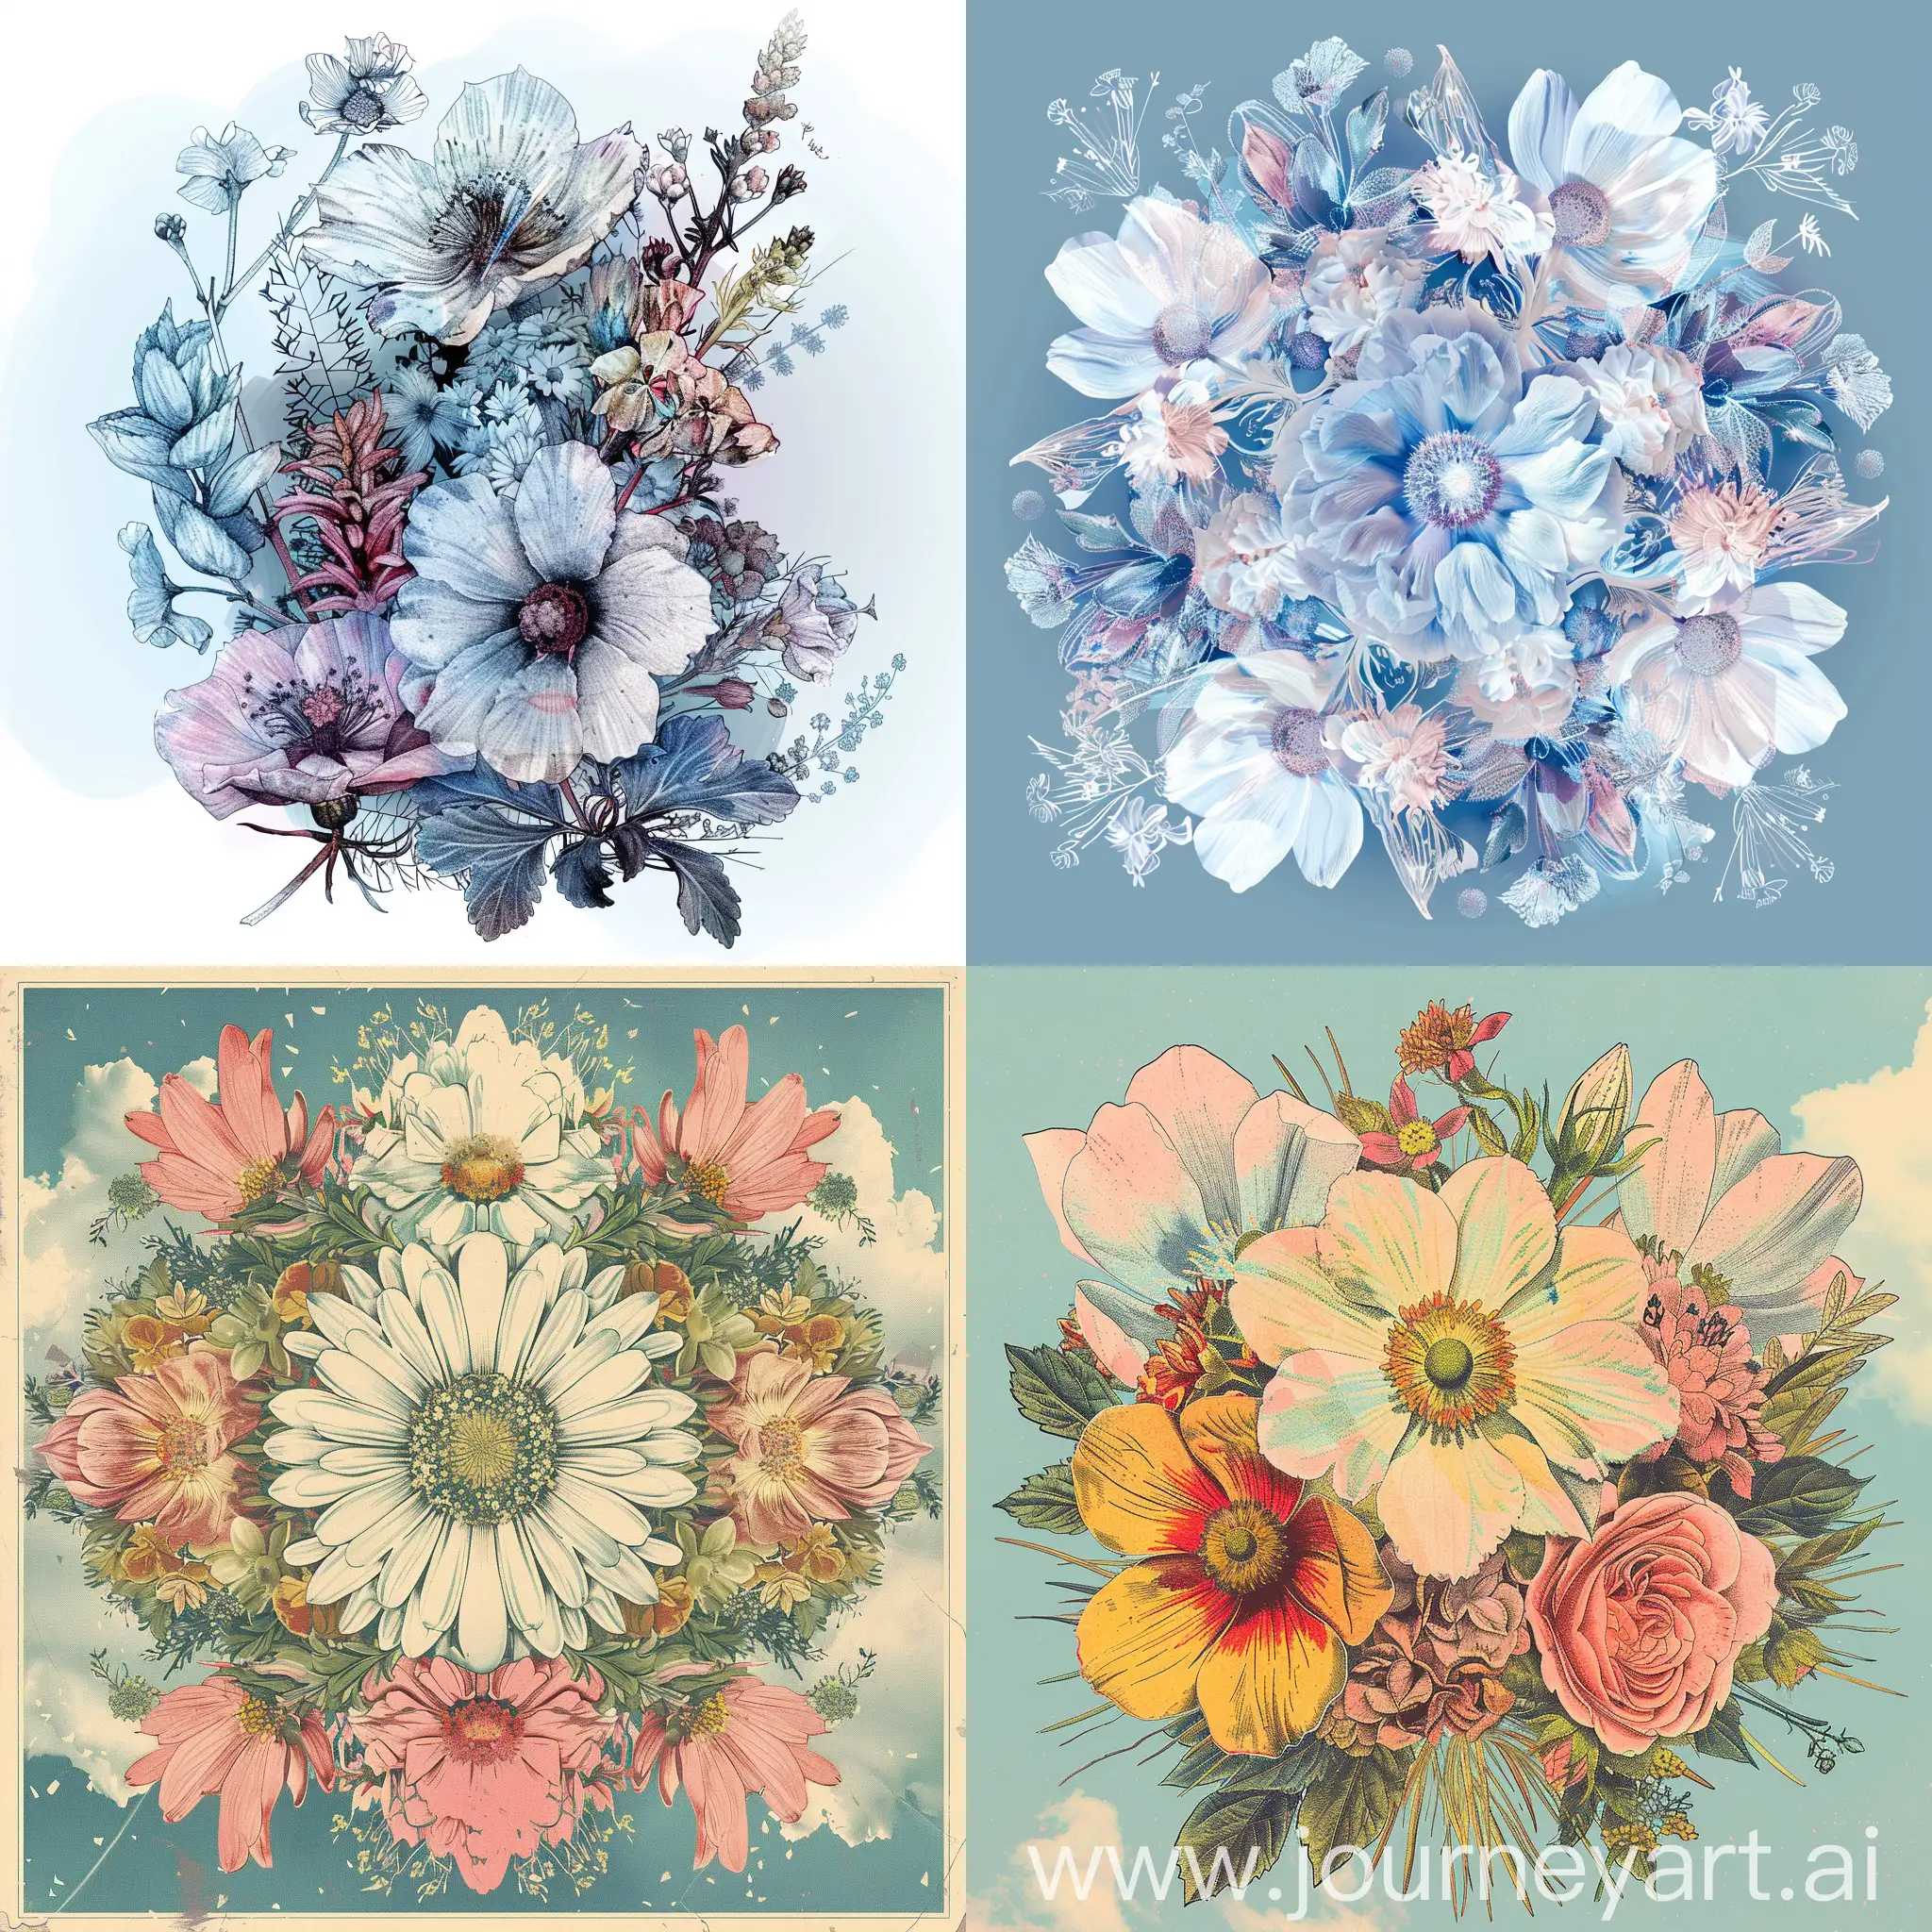 NatureInspired-Flowers-Collage-Organic-Photorealistic-Art-in-Light-Skyblue-and-Pink